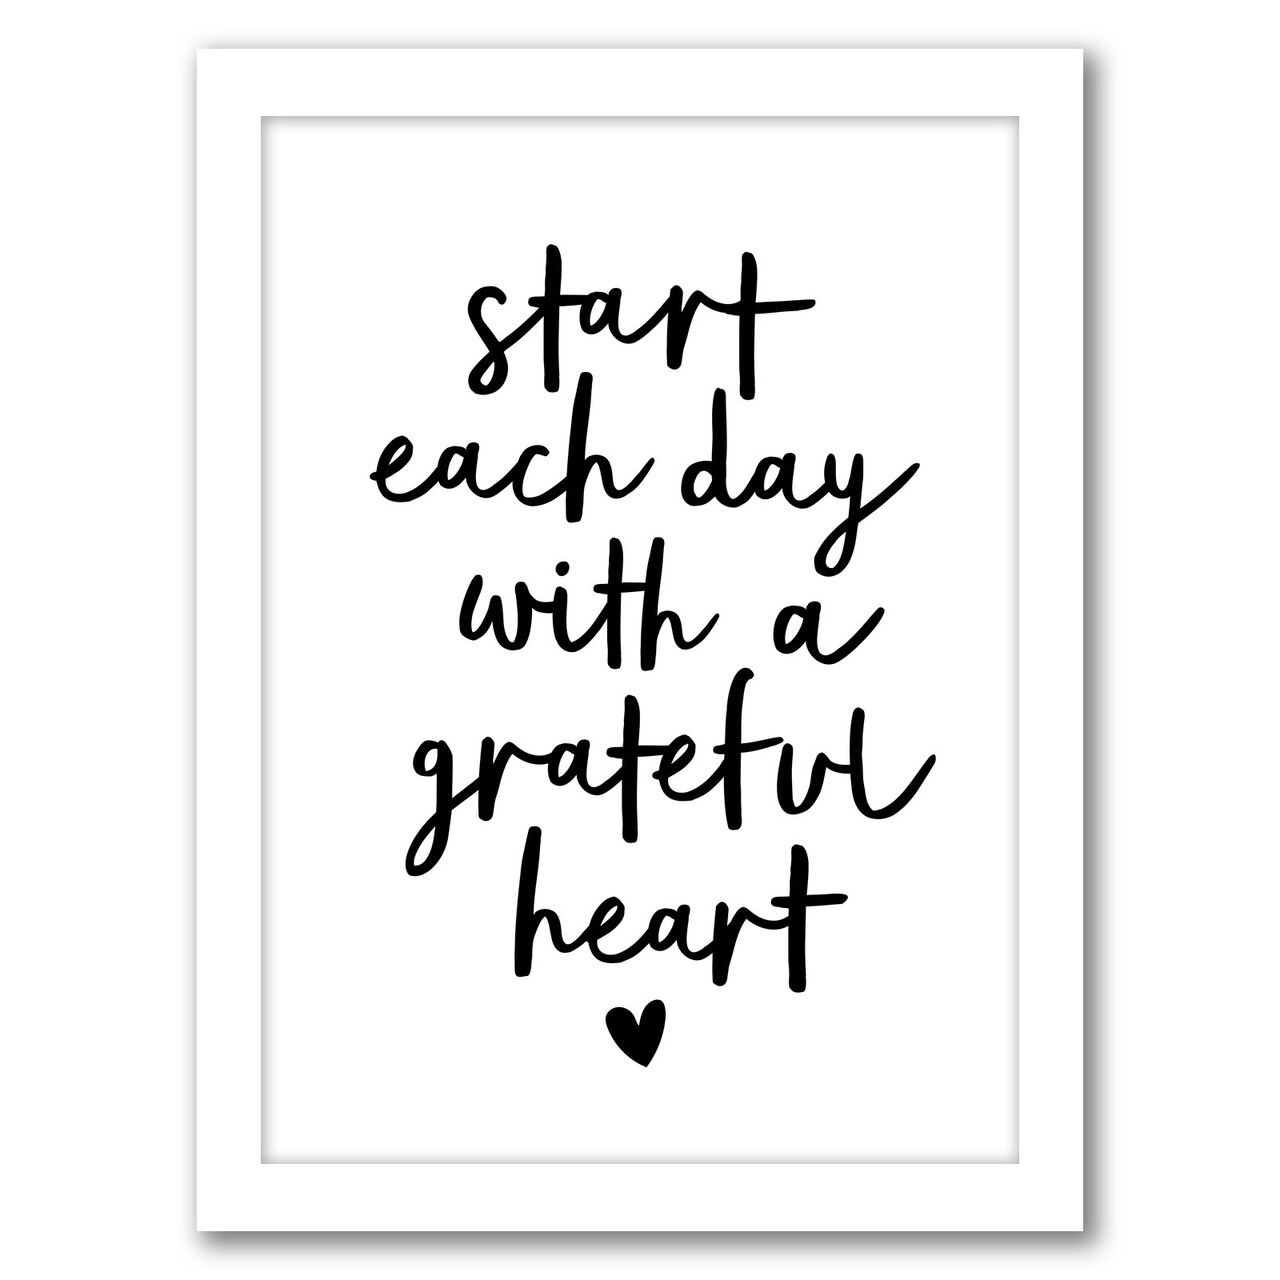 Start Each Day With A Grateful Heart by Motivated Type Frame  - Americanflat